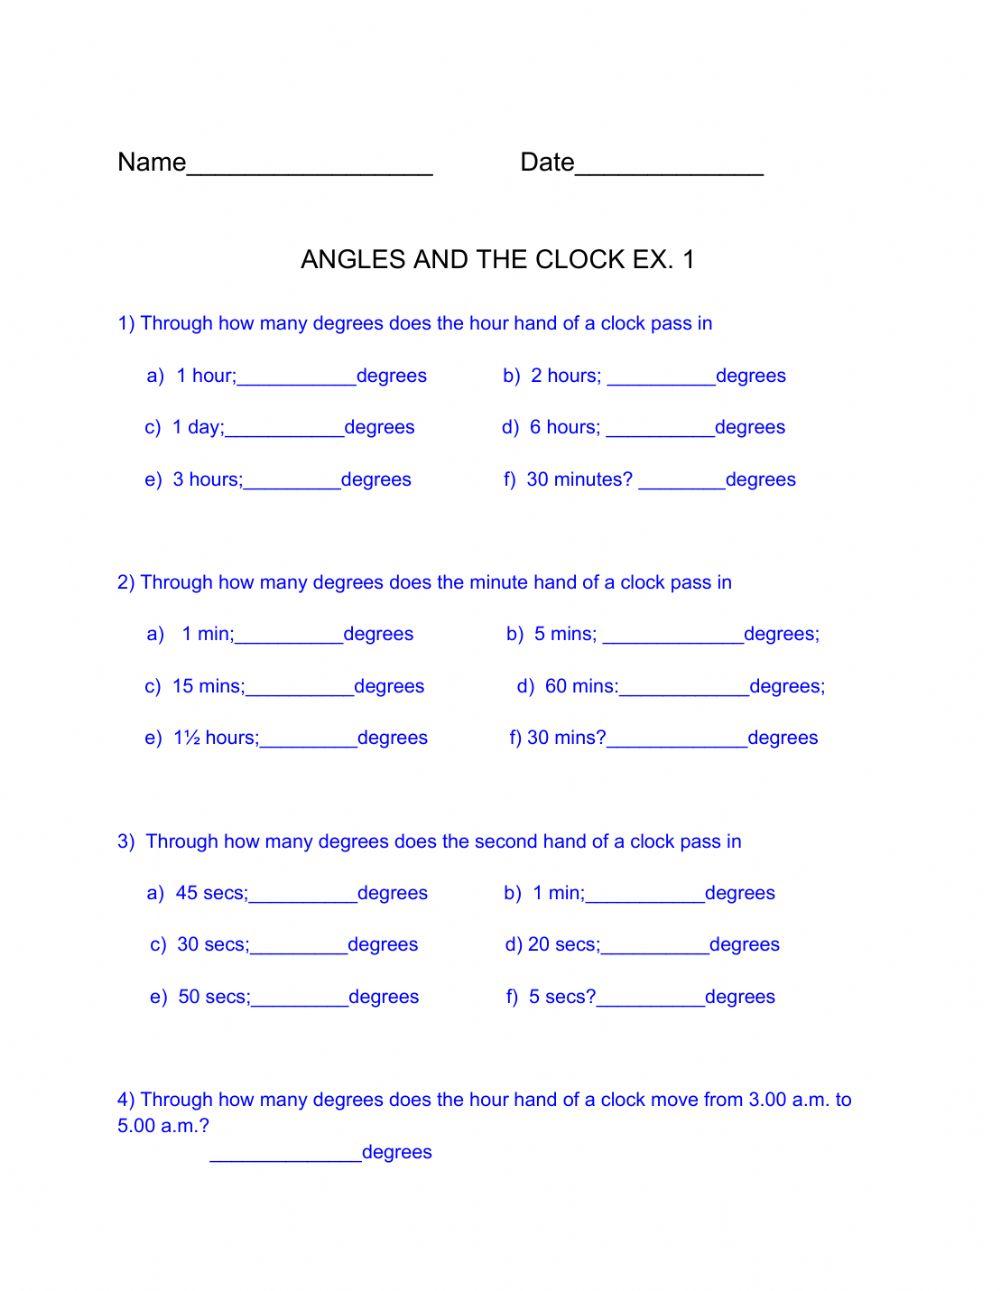 Angles and the clock ex. 1